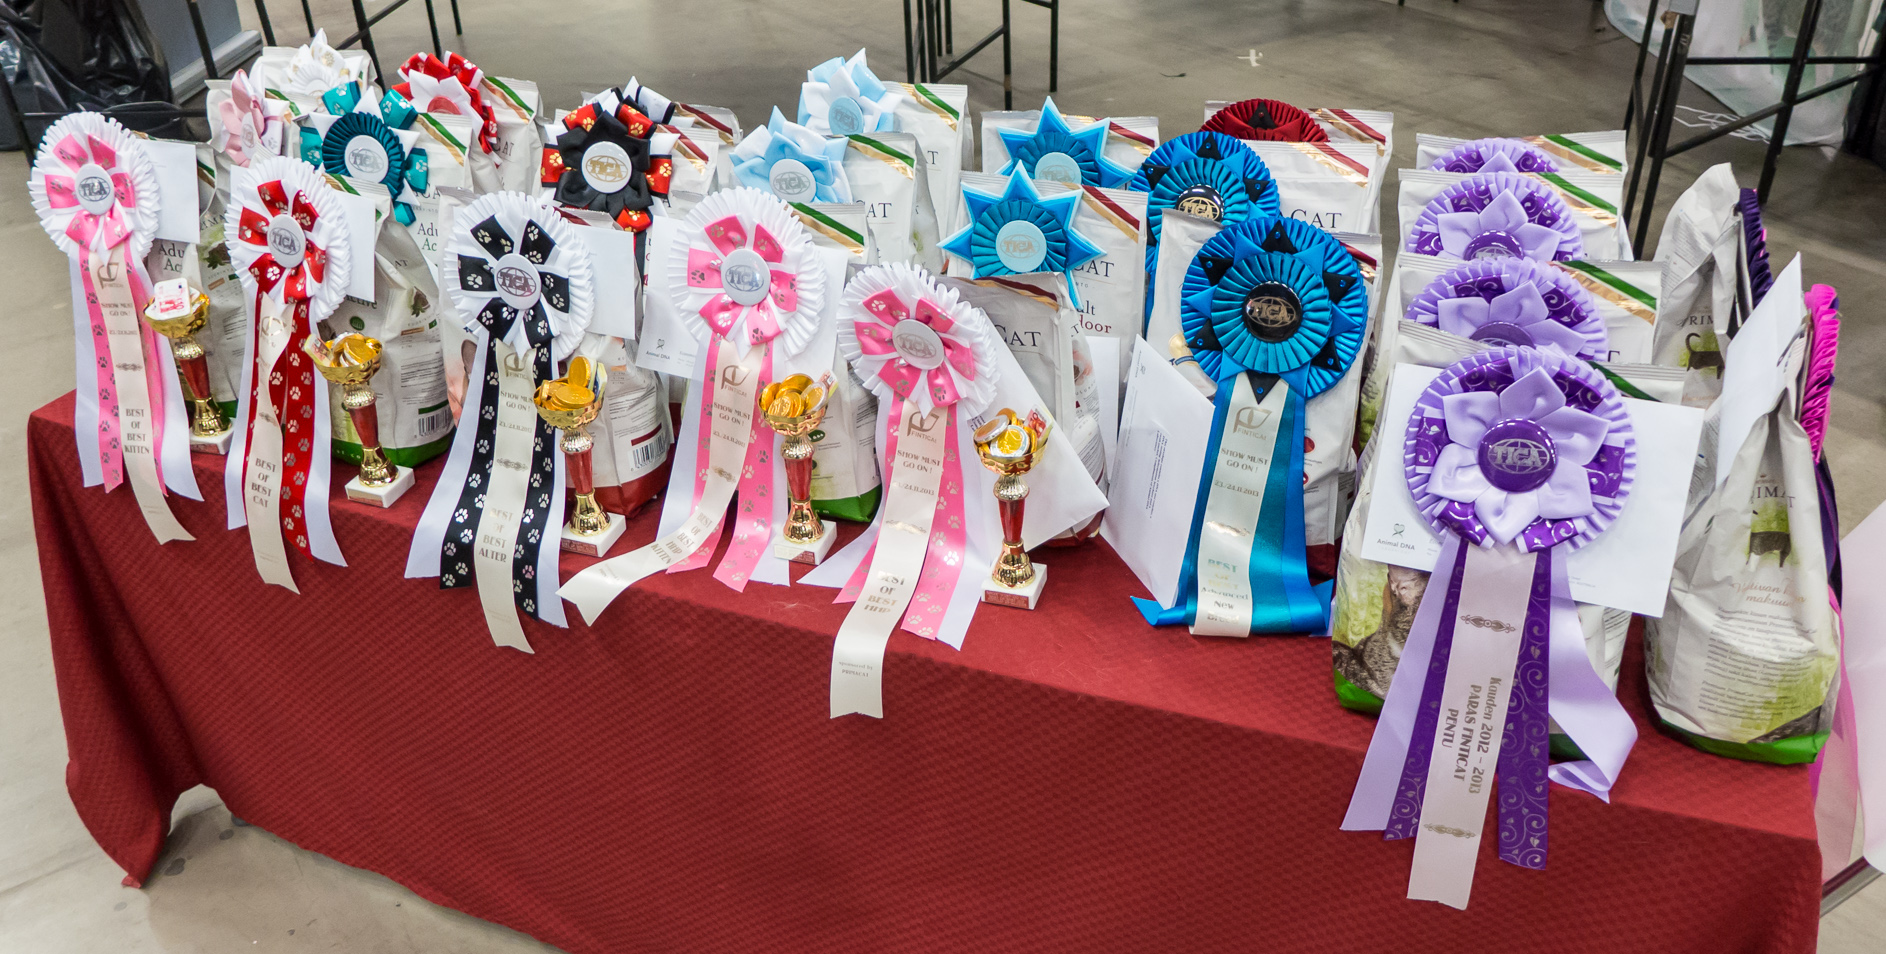 the prize table, photo 215176, 2013-11-24